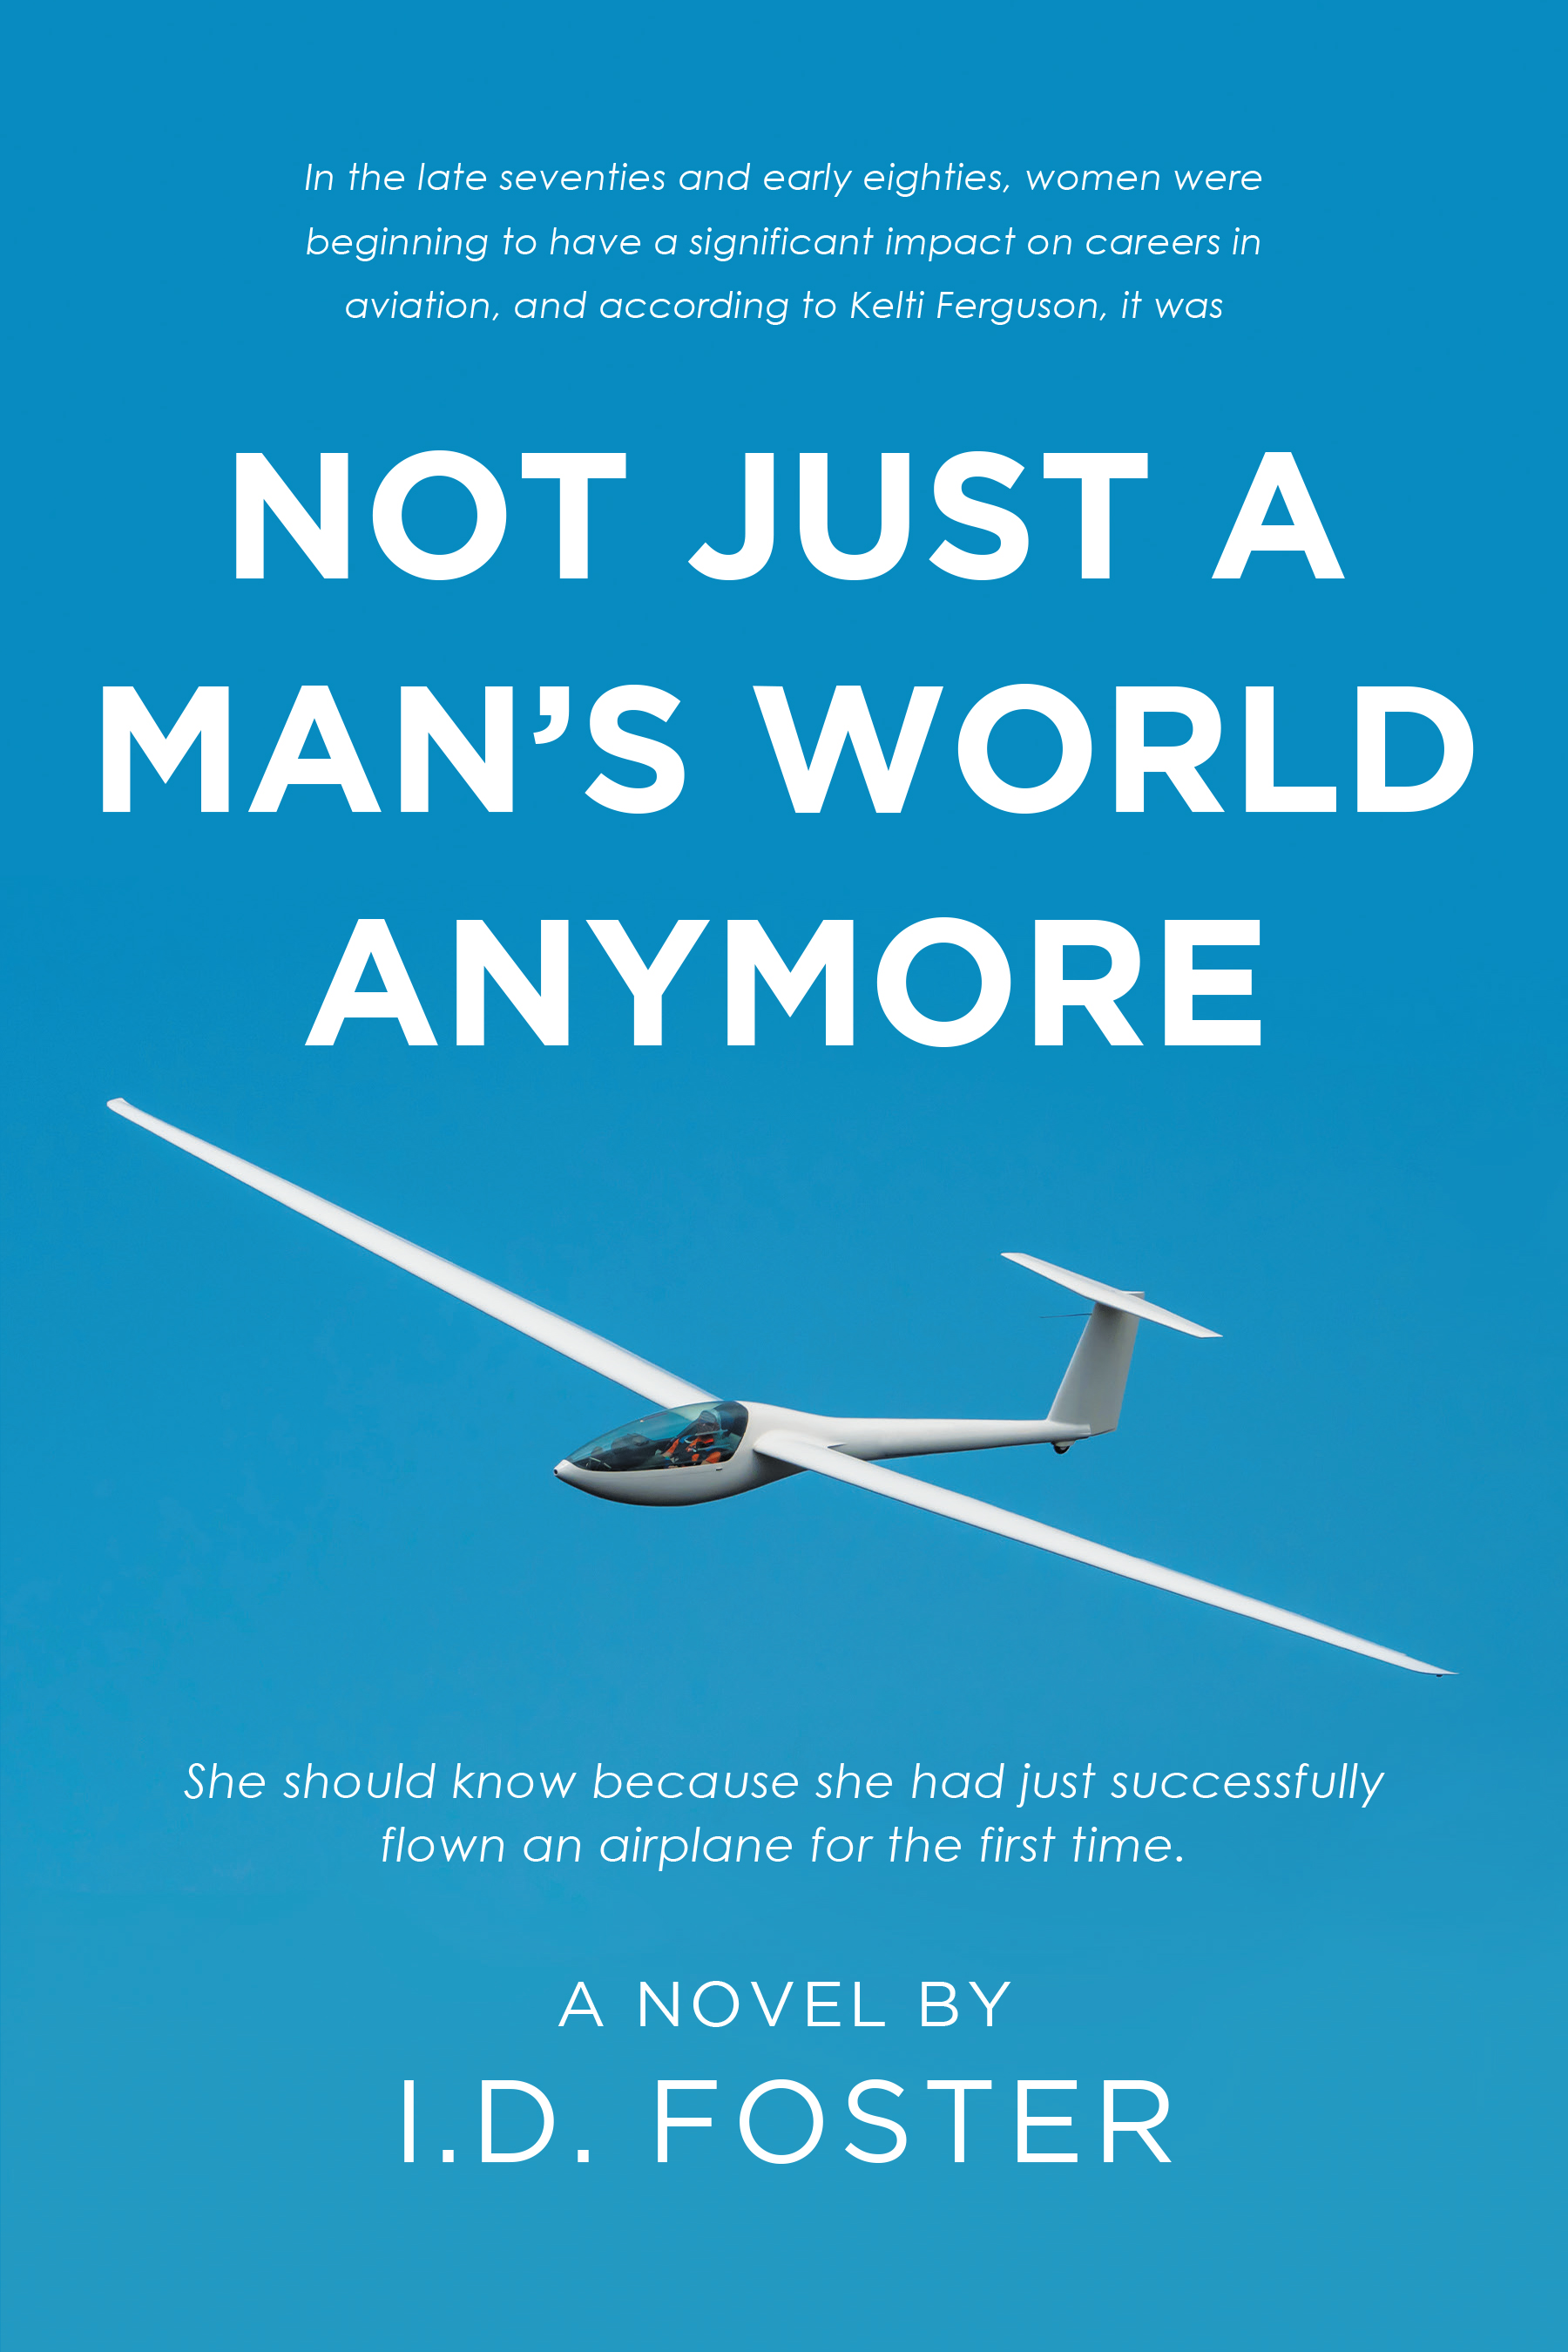 Author I.D. Foster’s New Book, "Not Just a Man’s World Anymore," is a Compelling Novel About a Woman’s Journey Overcoming the Odds to Become a Pilot